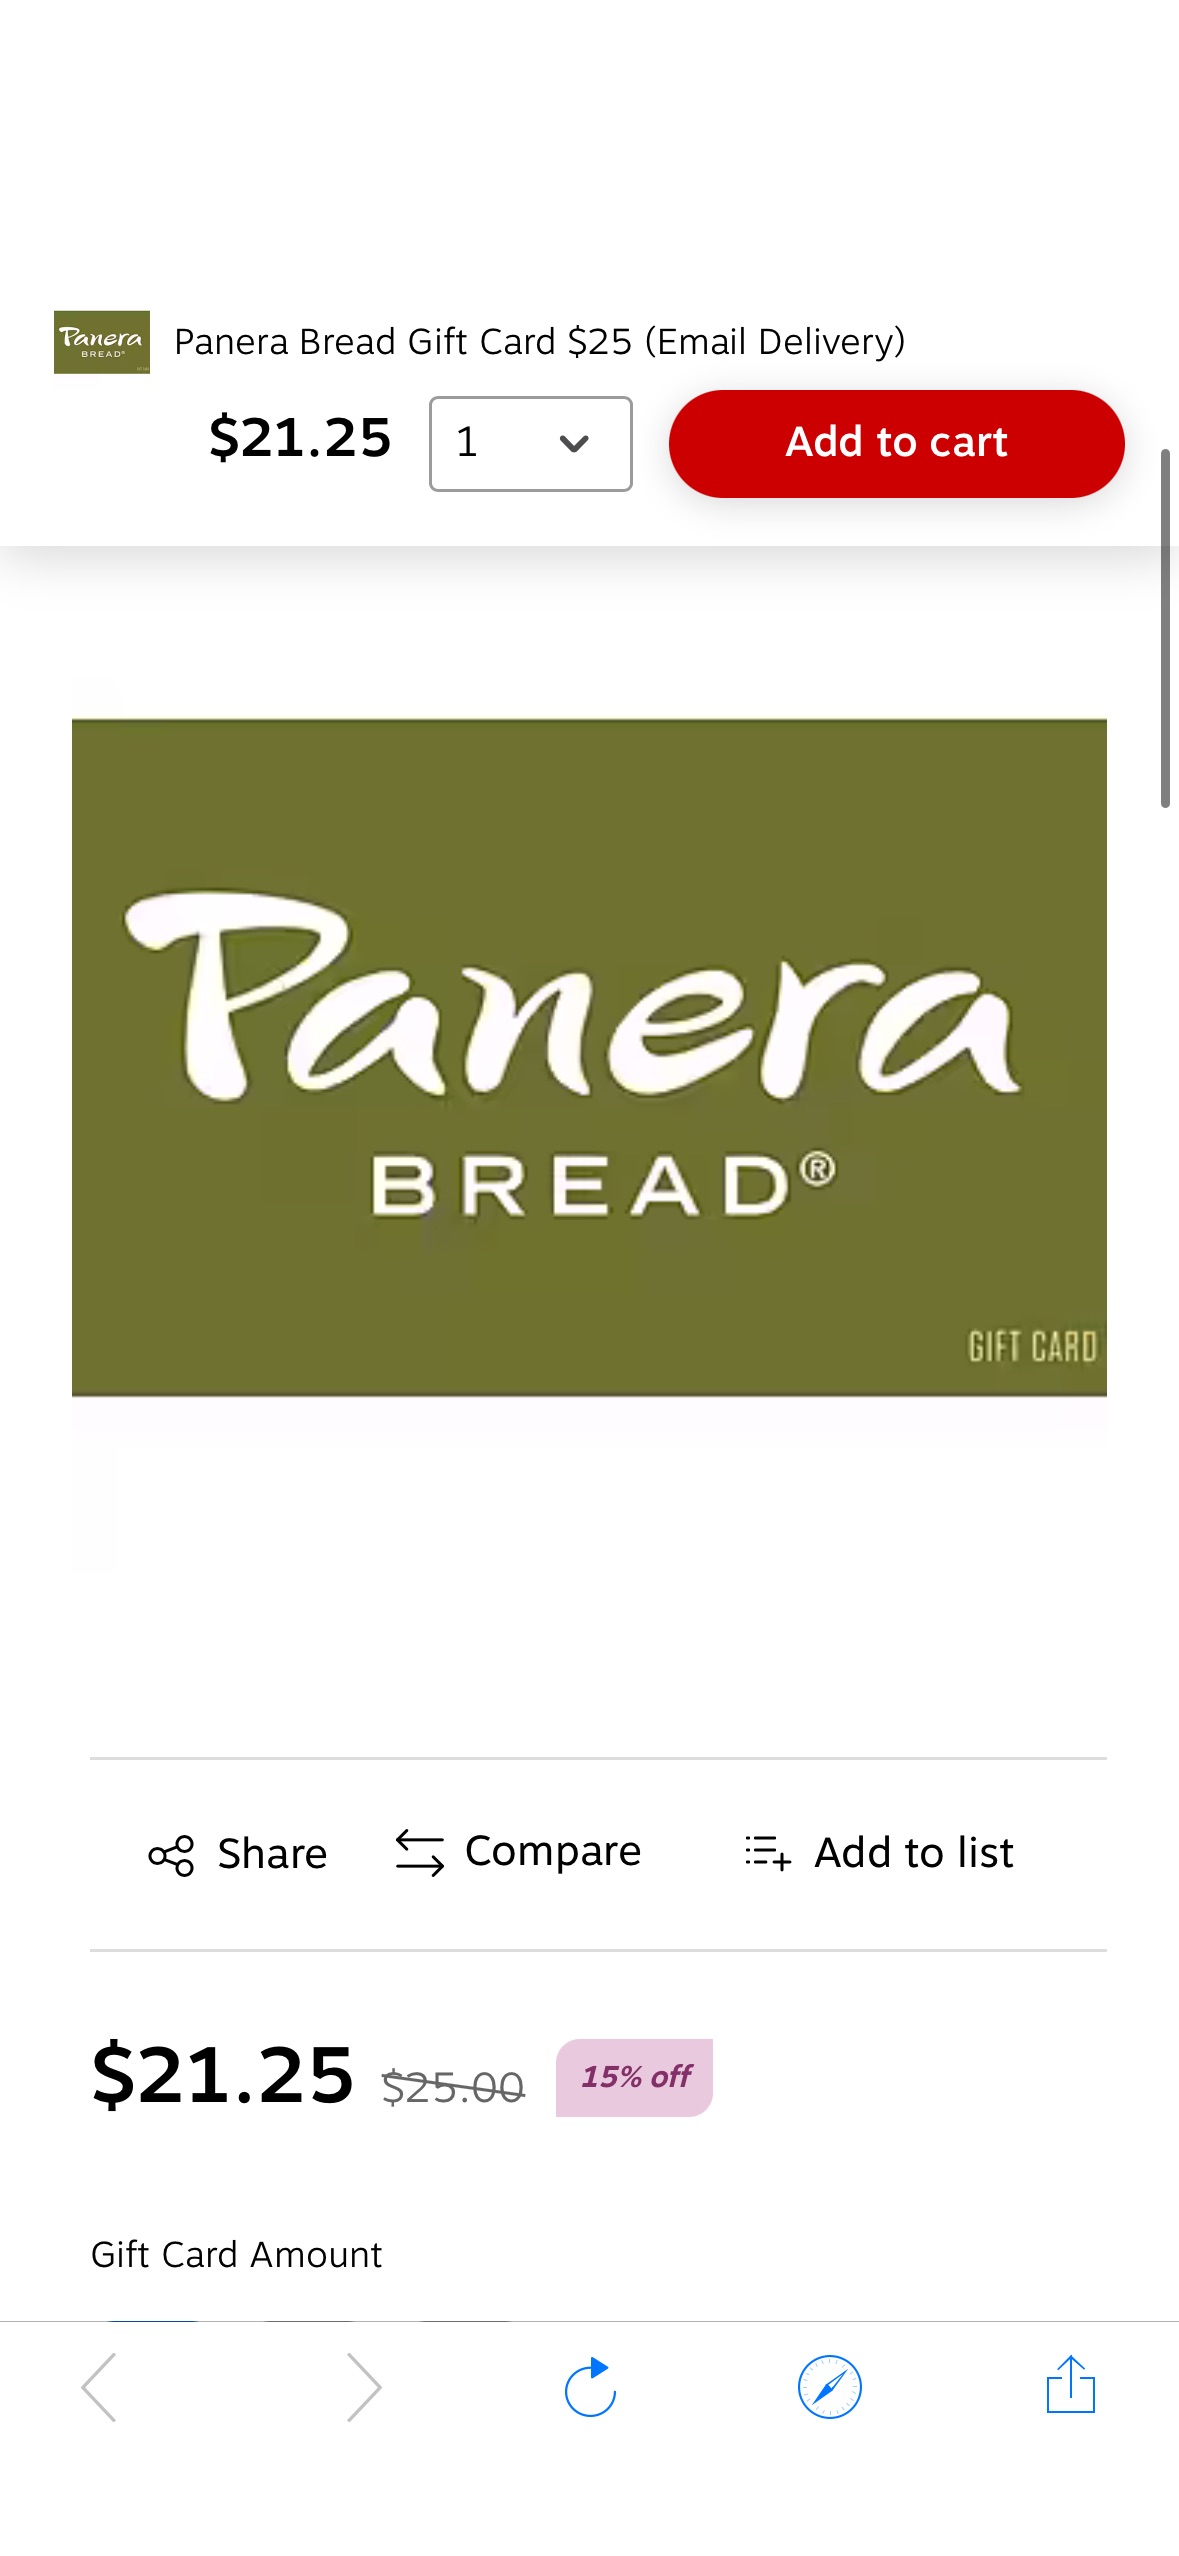 Panera Bread Gift Card $25 (Email Delivery) | Staples